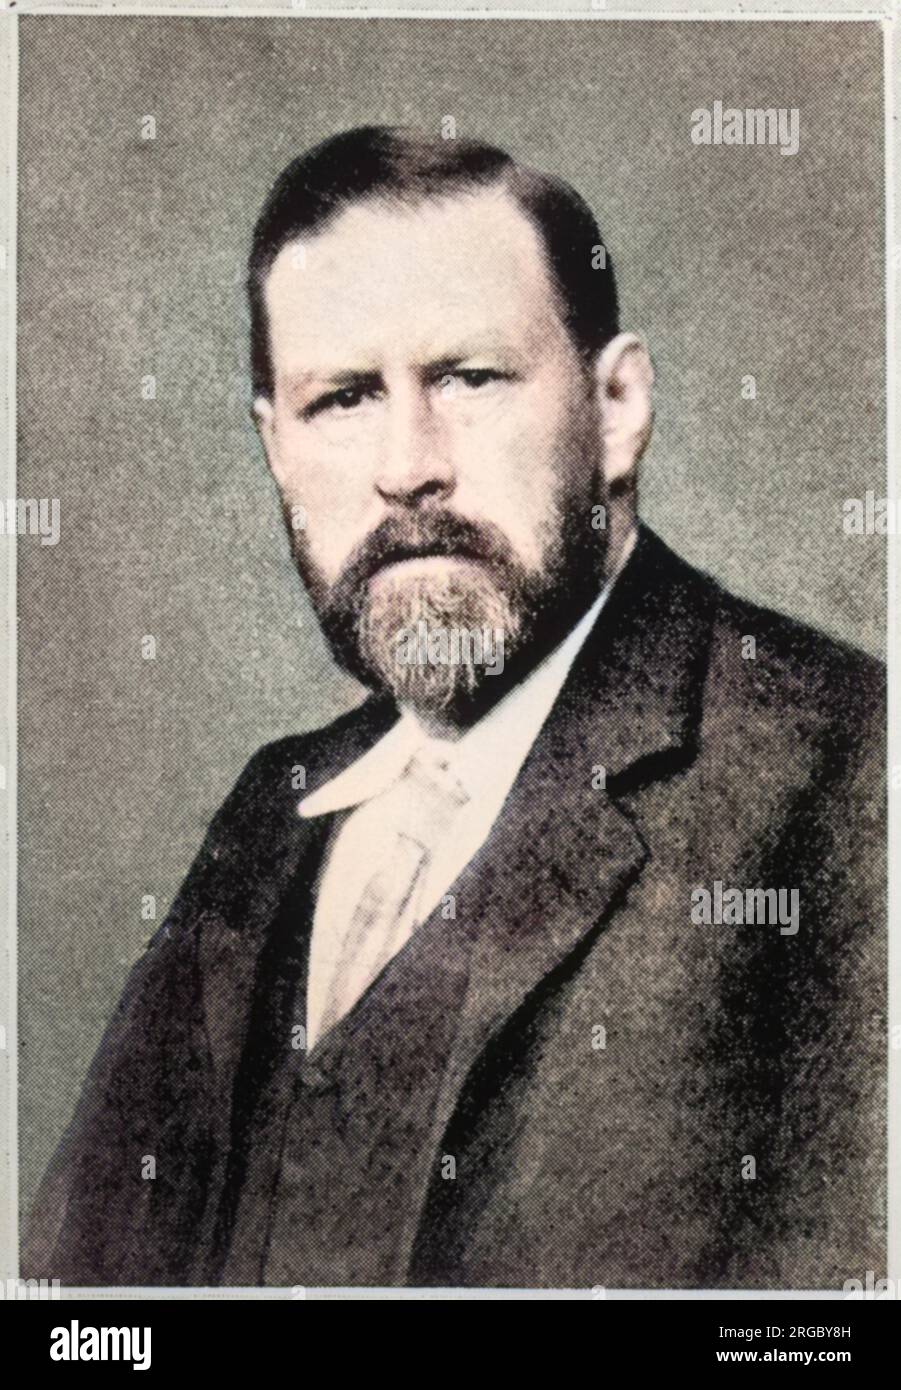 Bram Stoker (1847 - 1912), novelist and short story writer, best known for the gothic novel Dracula (1897). He was also theatre manager for Henry Irving at the Lyceum Theatre, London. Stock Photo